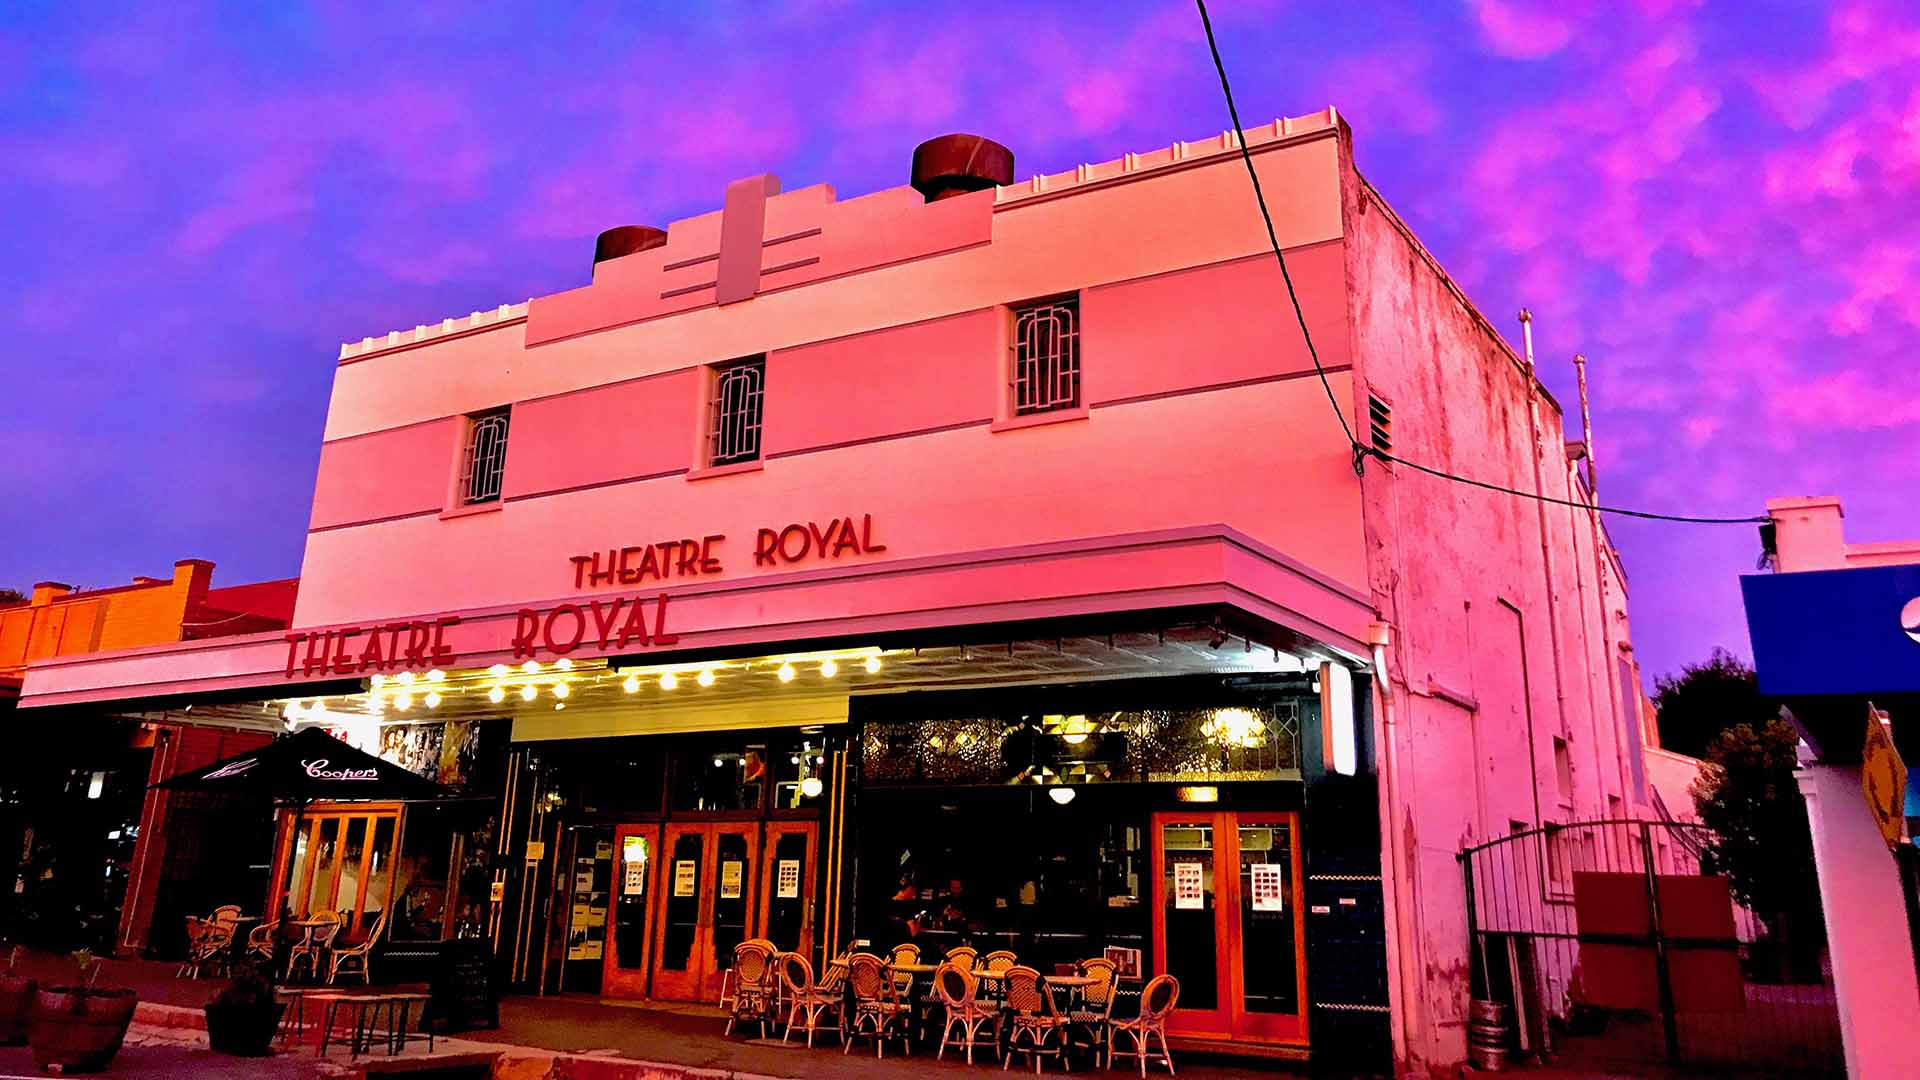 Victoria's 167-Year-Old Theatre Royal Castlemaine Has Just Launched Its Own Film Streaming Service